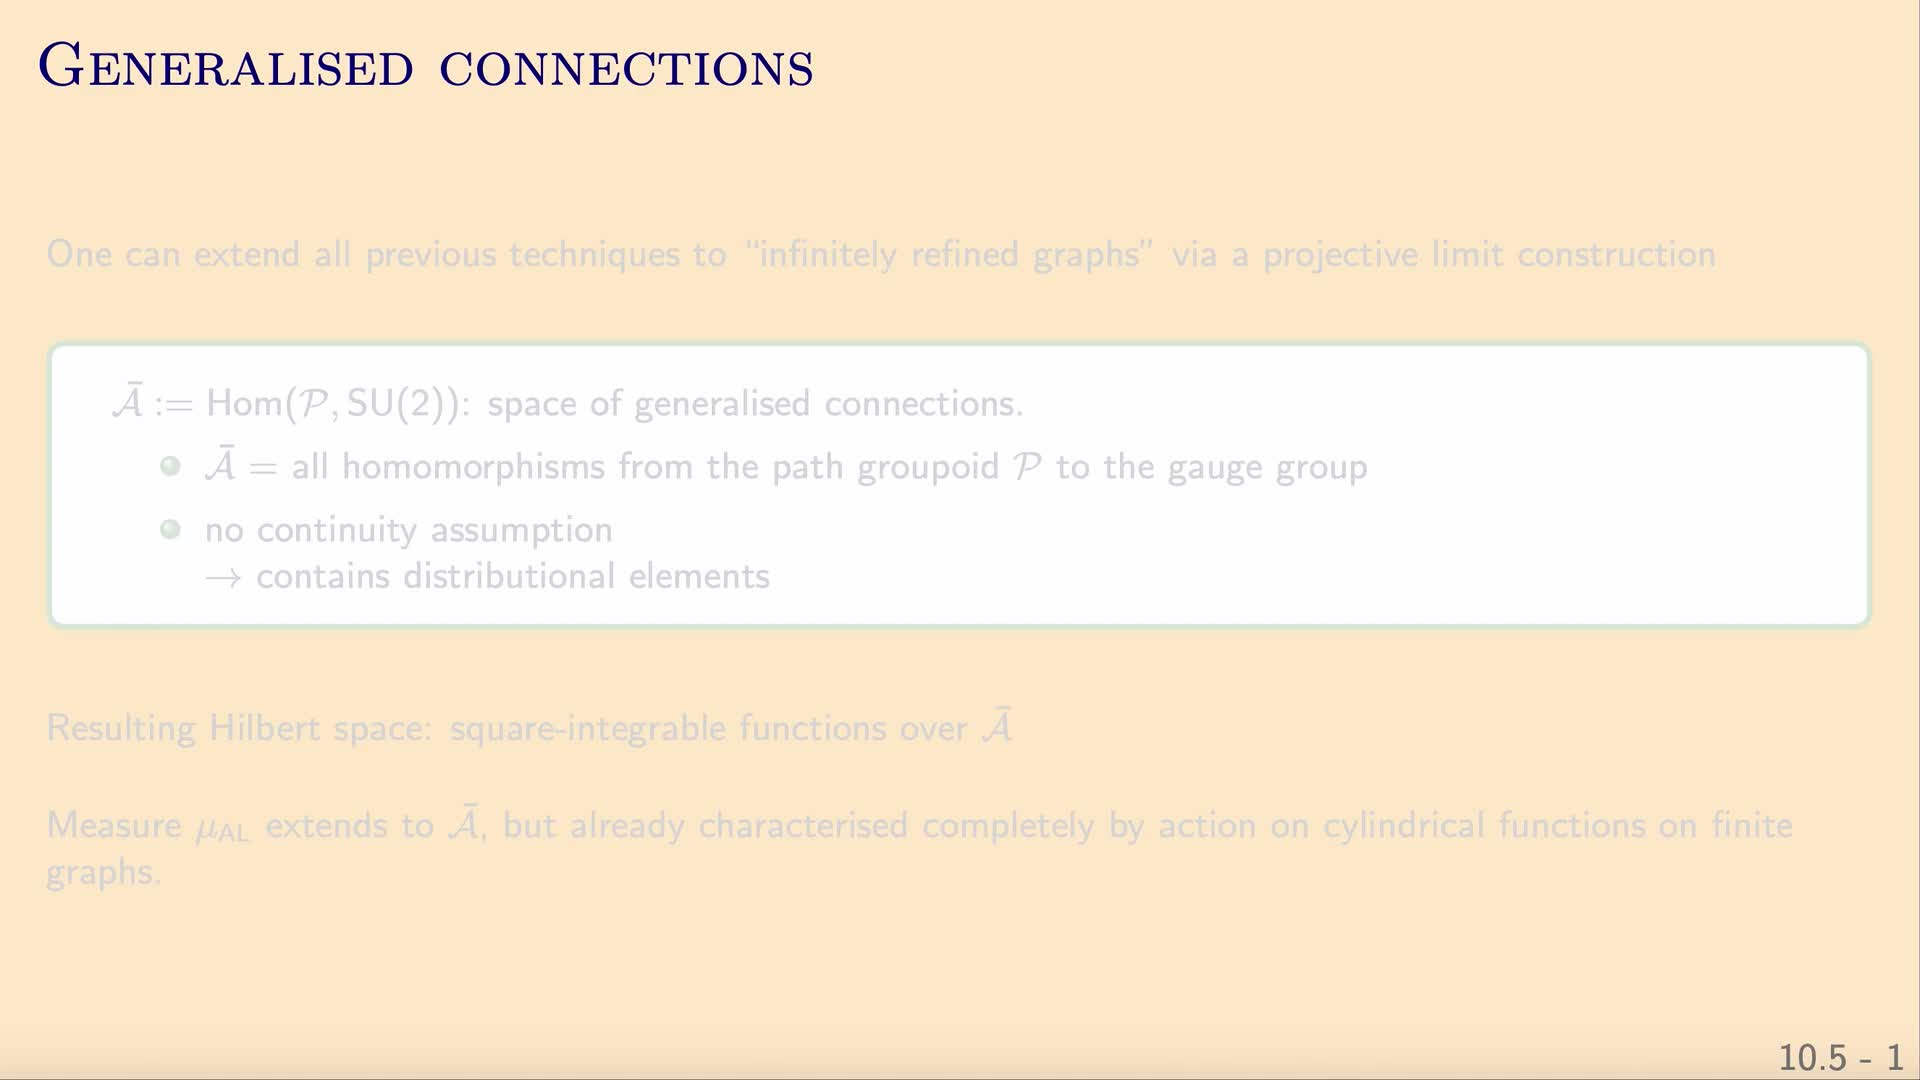 QG II: 10.5 - Generalized connections